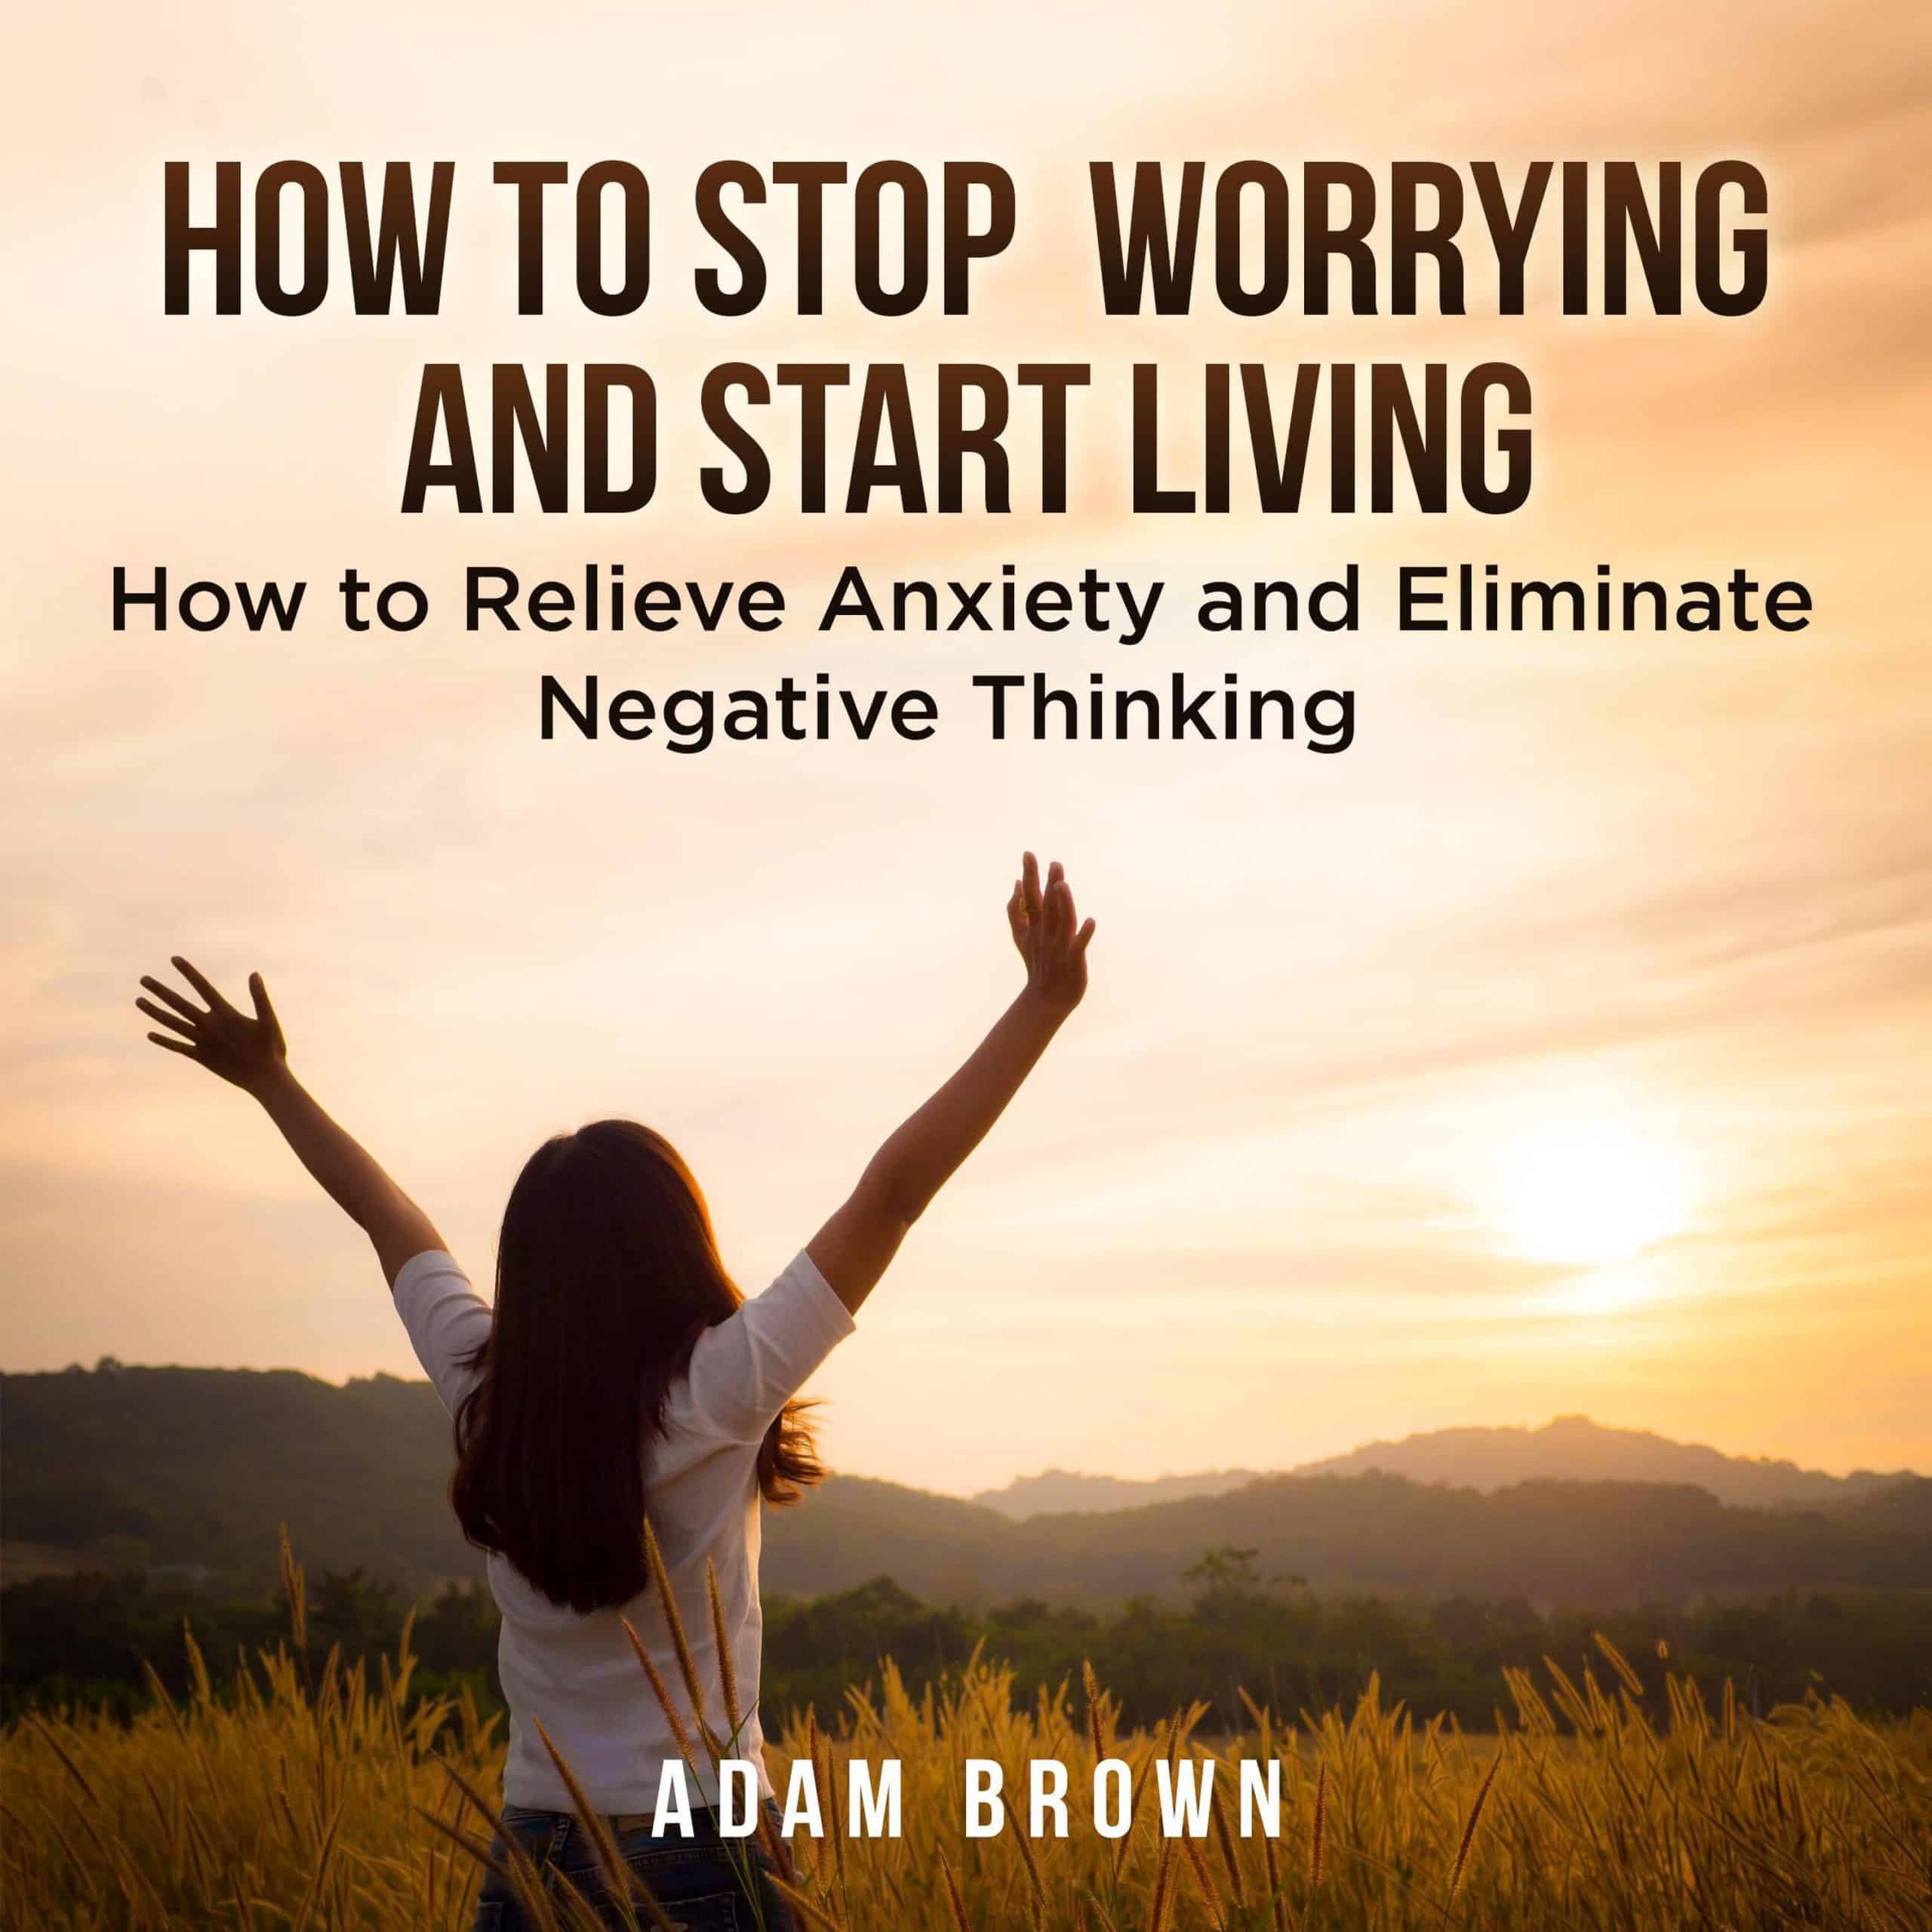 How To Stop Worrying and Start Living: How to Relieve Anxiety and ...